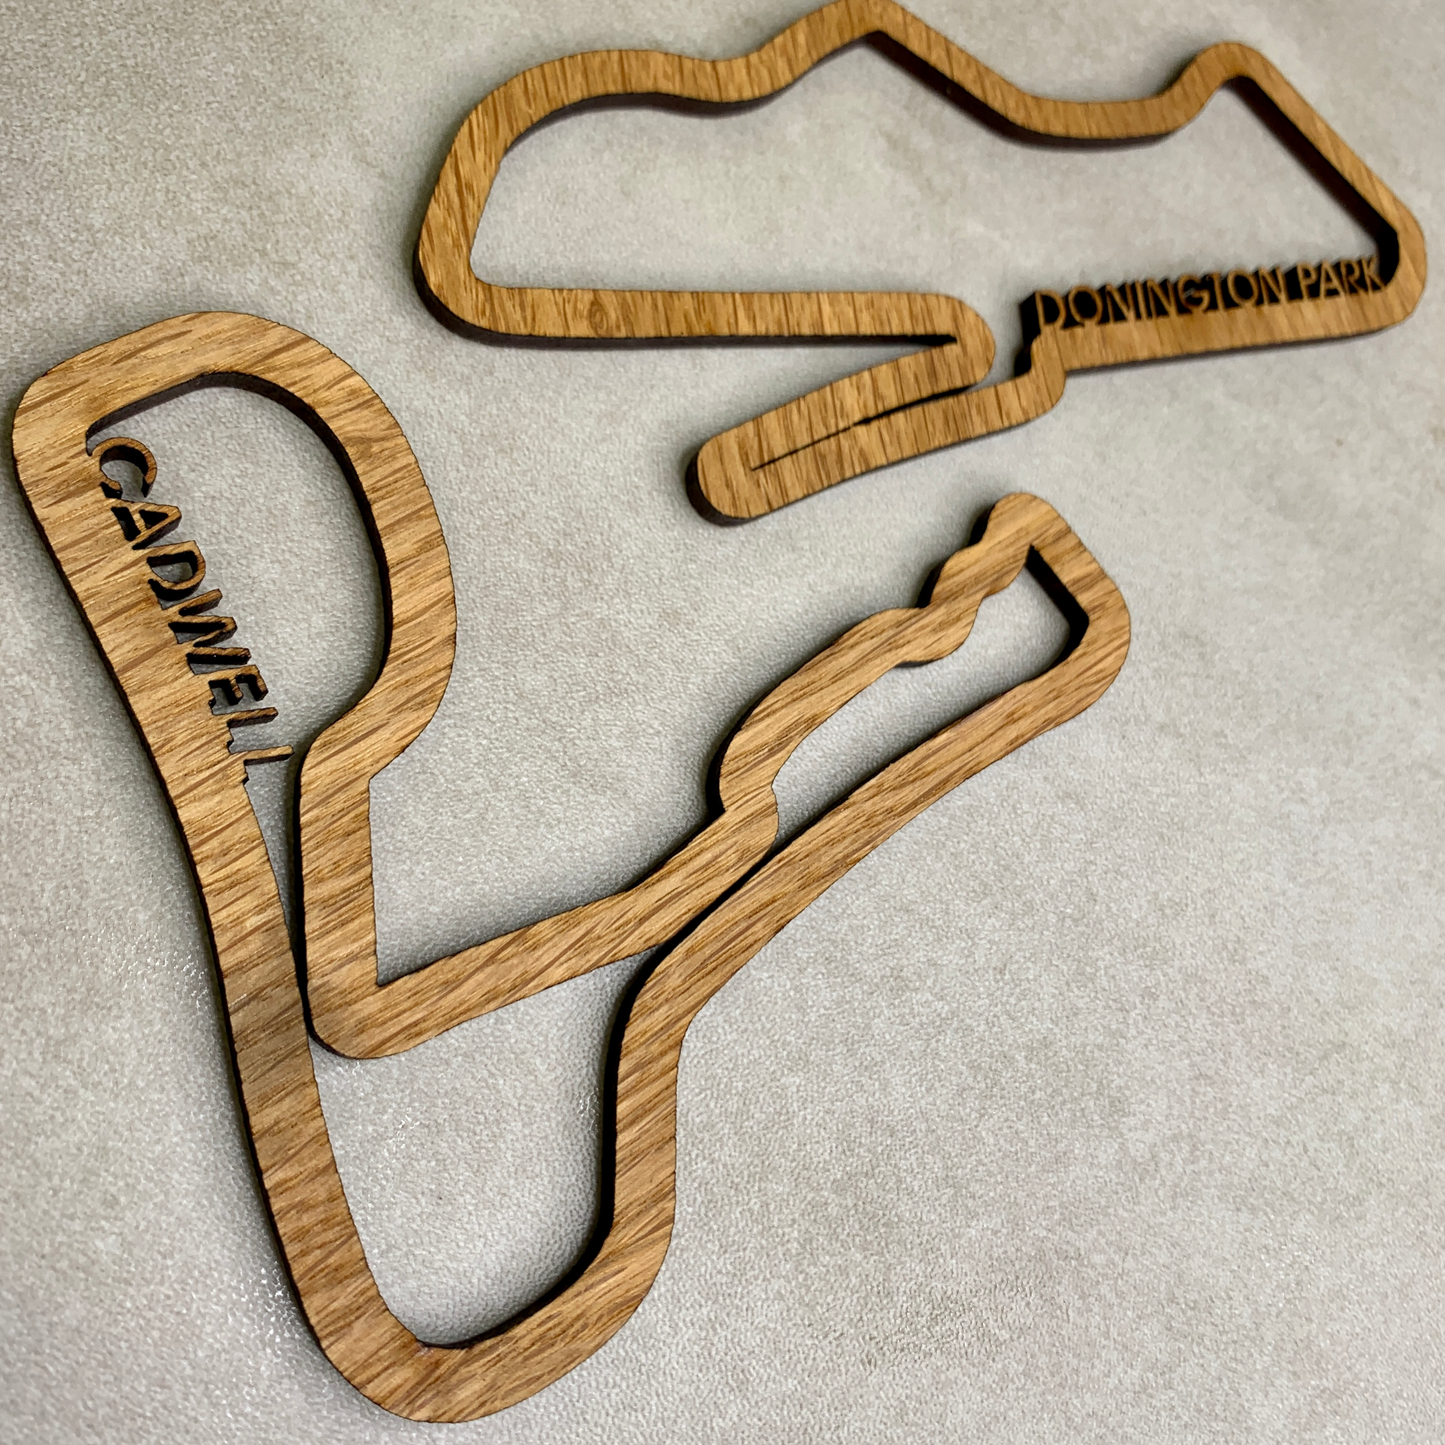 UK Circuits Collection - Wood Finishes